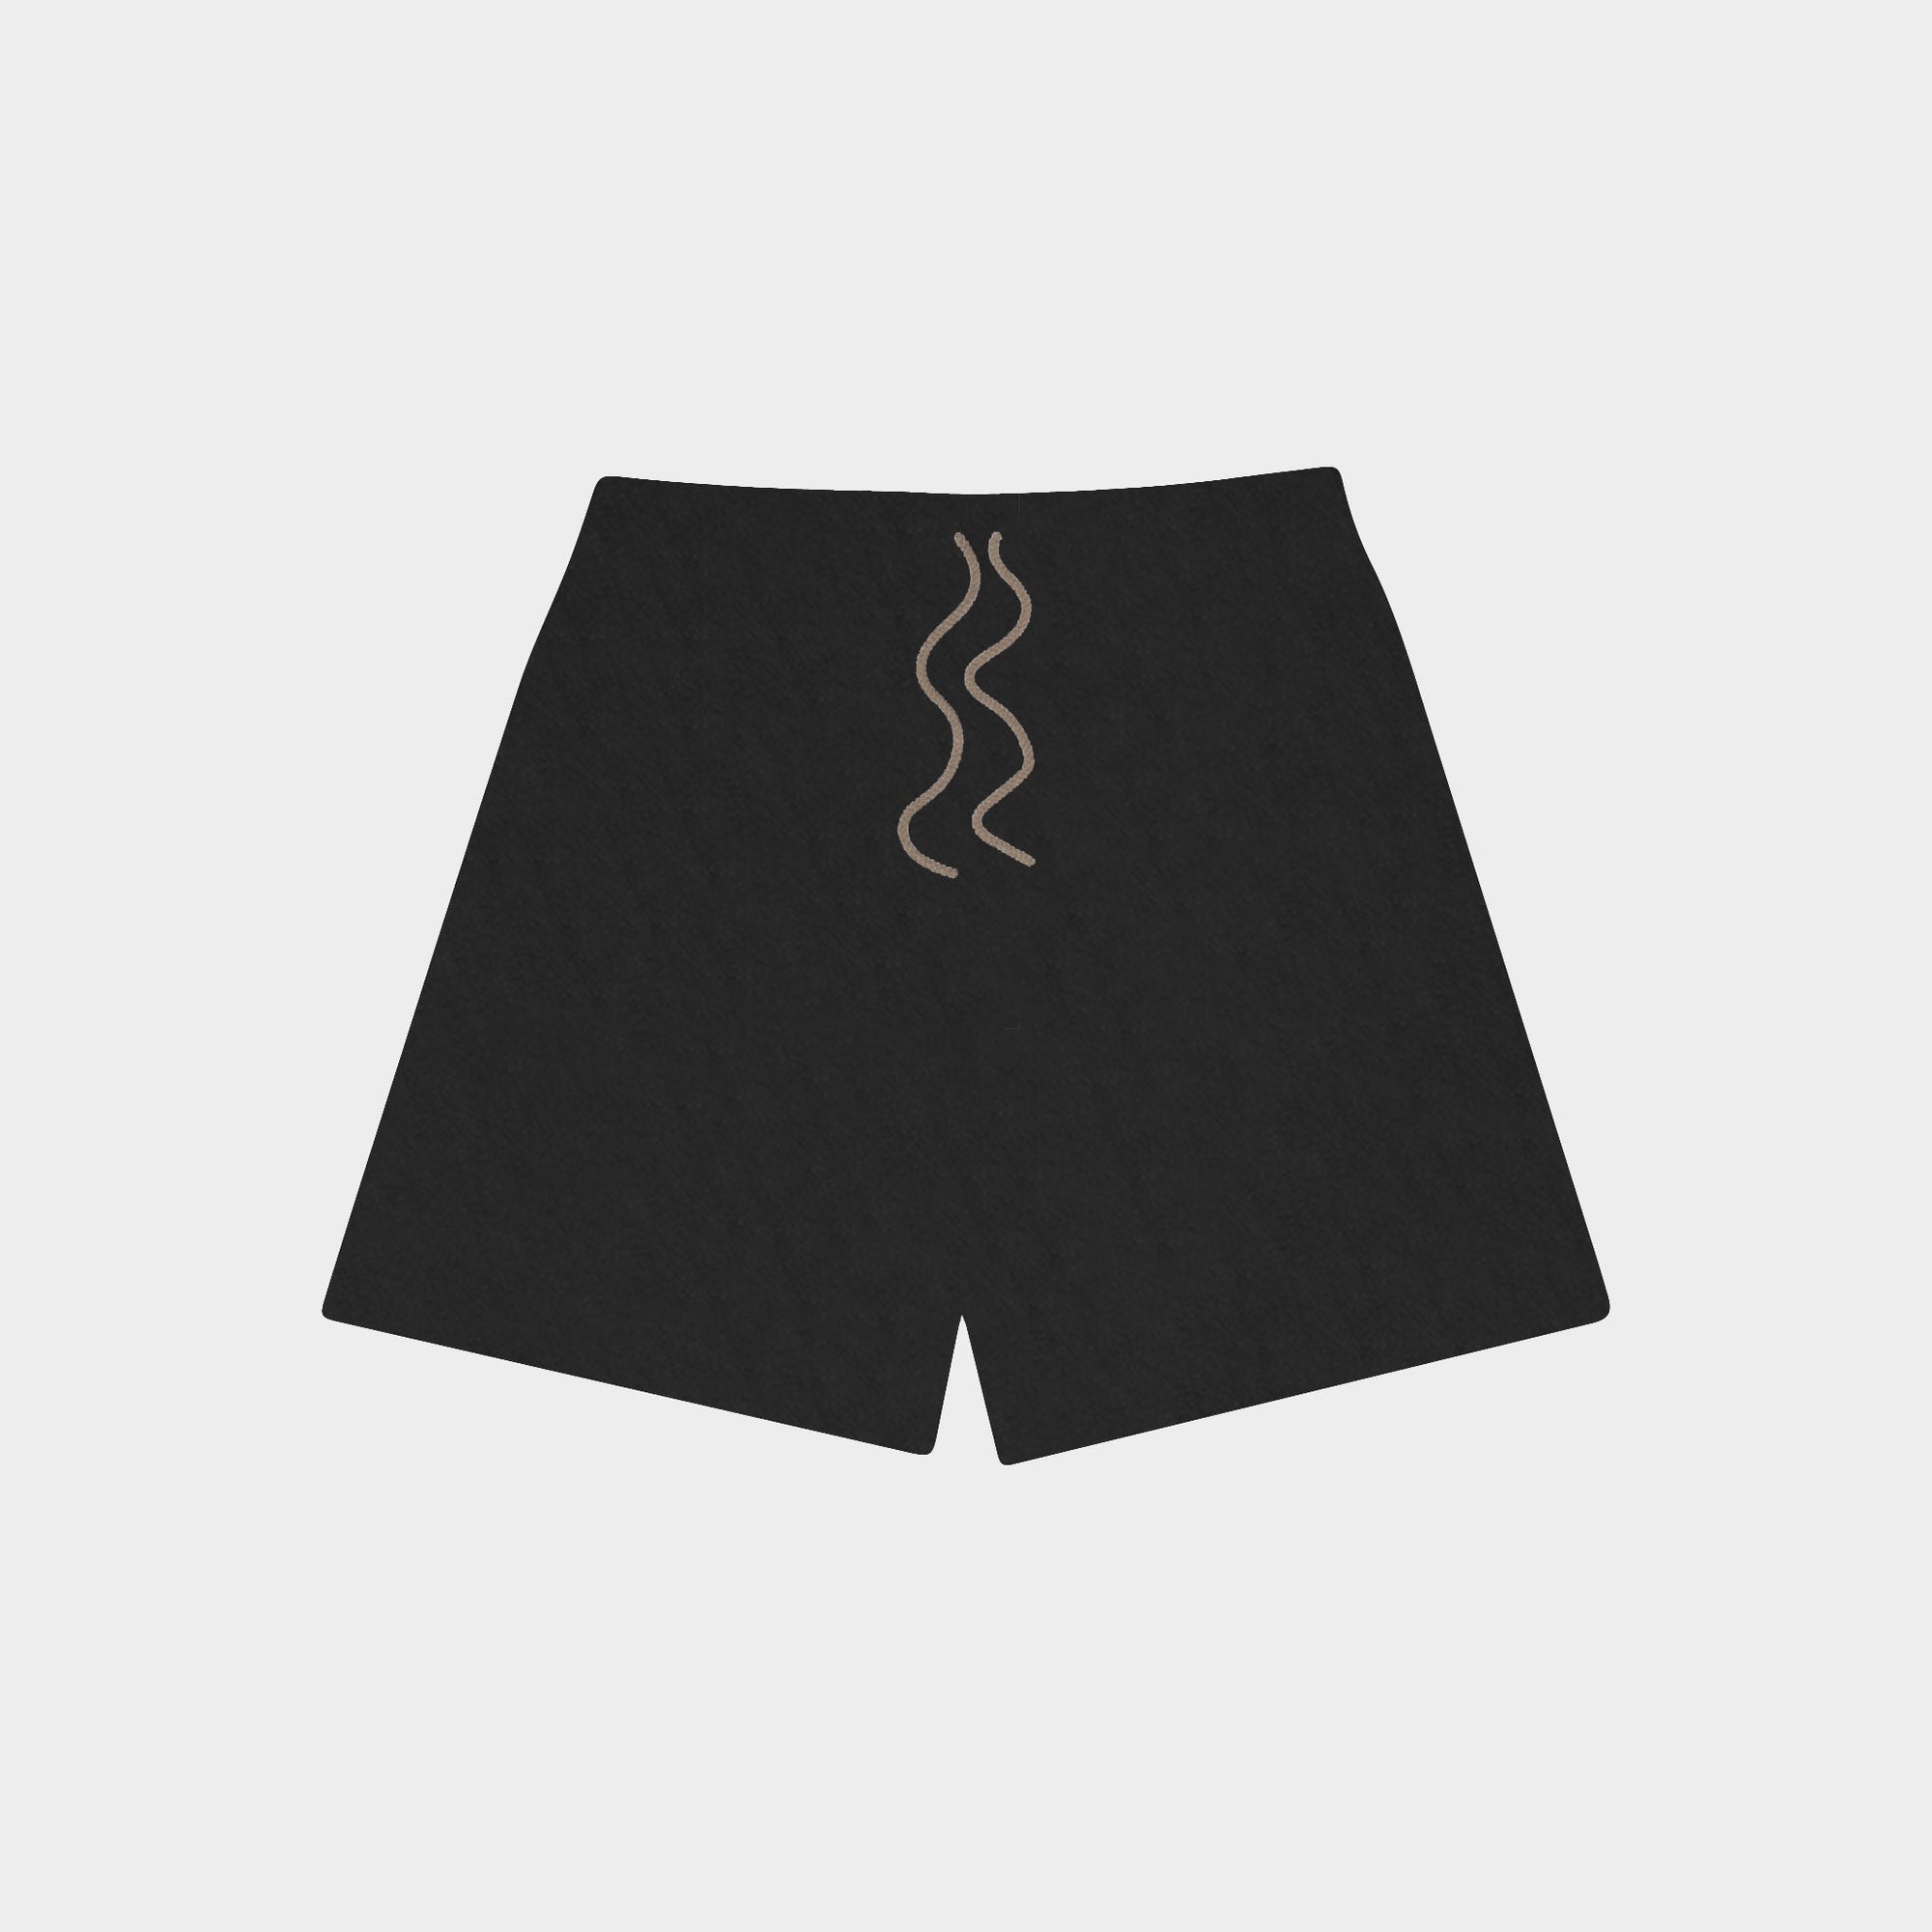 Just Towel Shorts - Black - RED LETTERS